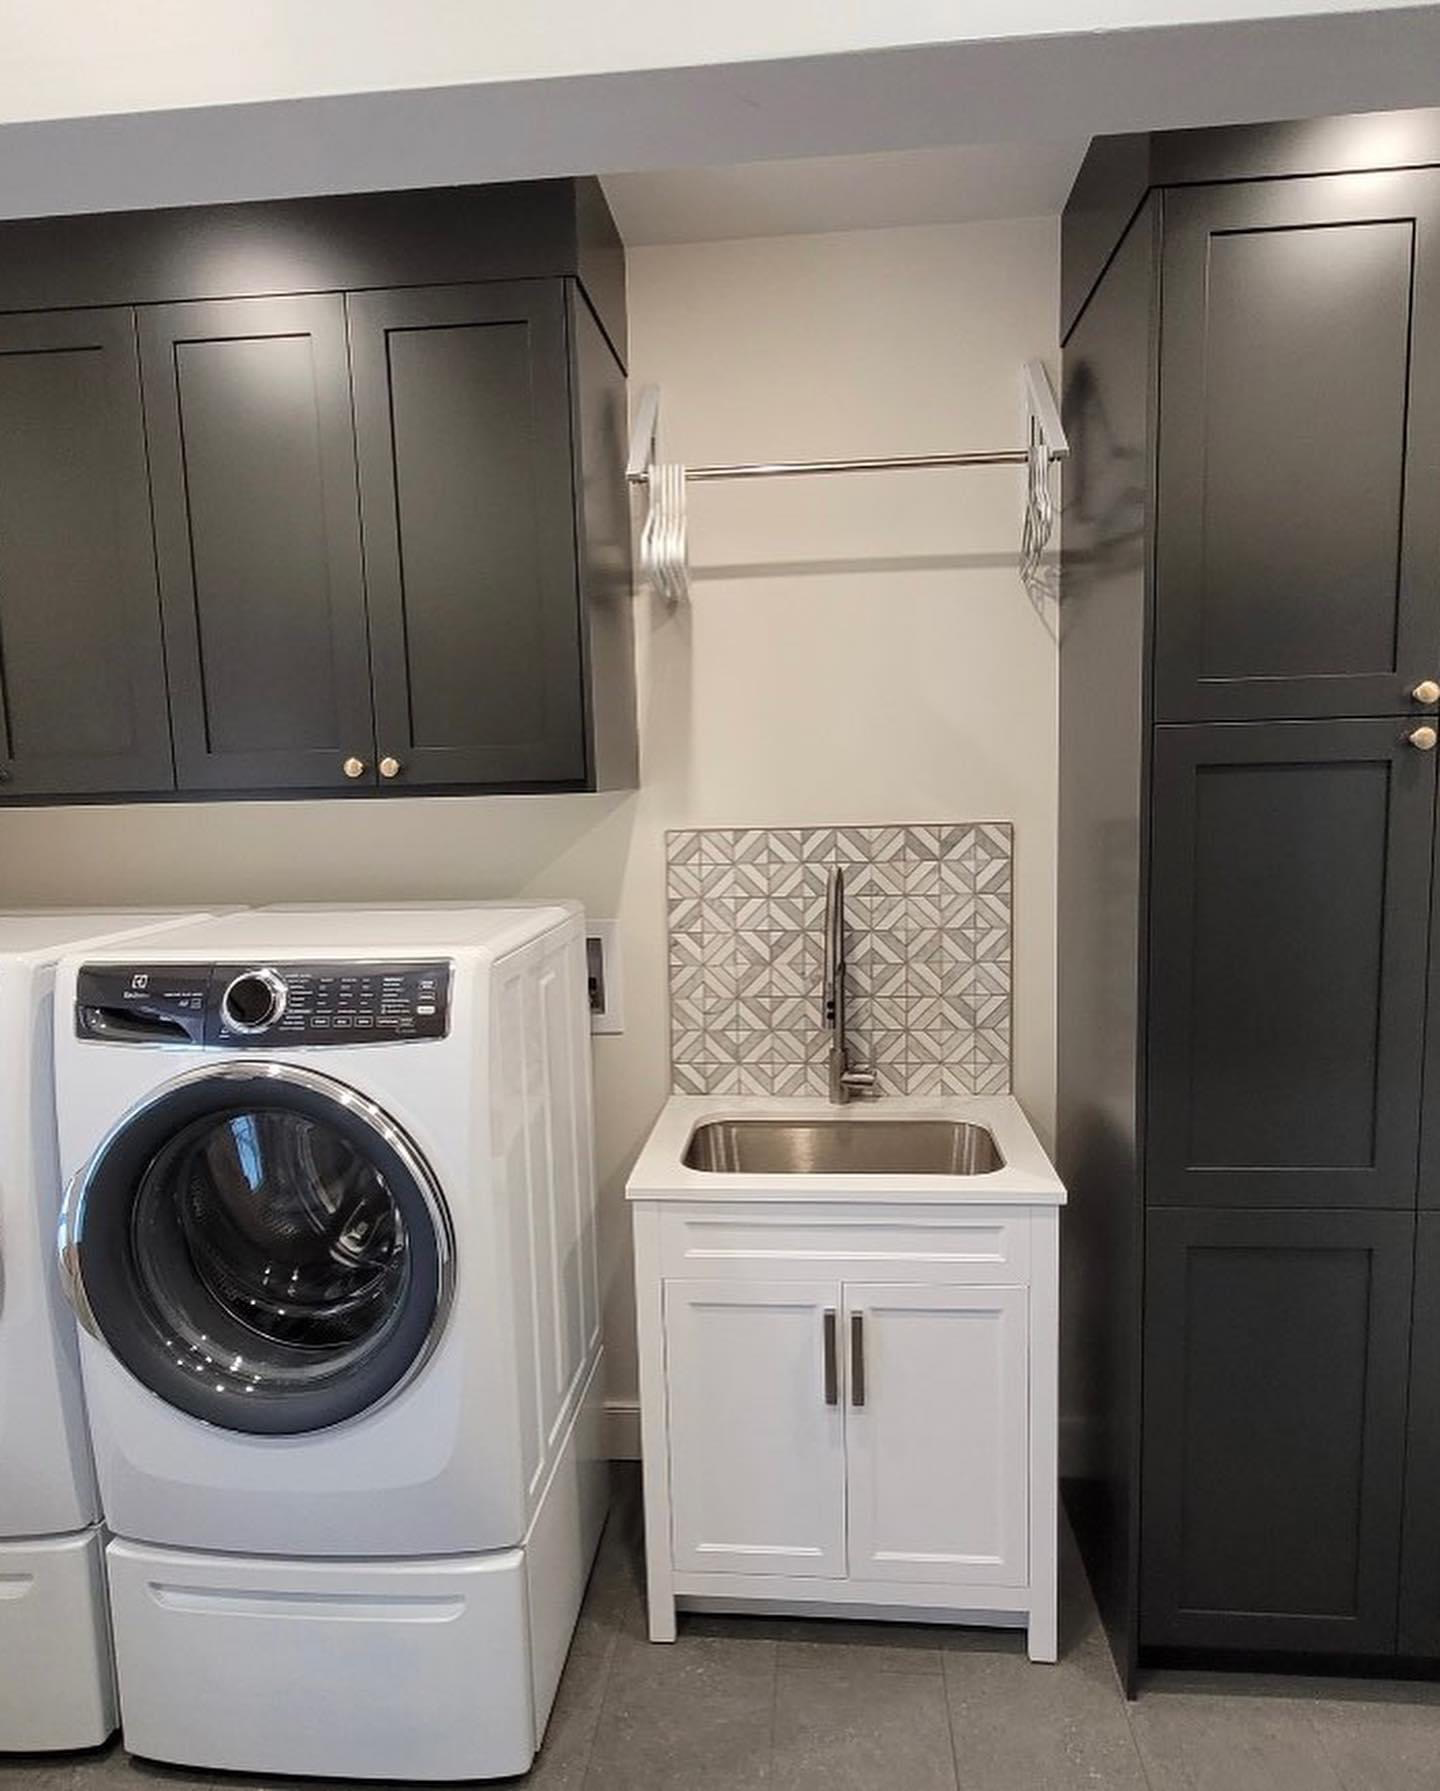 Narrow view of remodelled laundry room with custom cabinetry